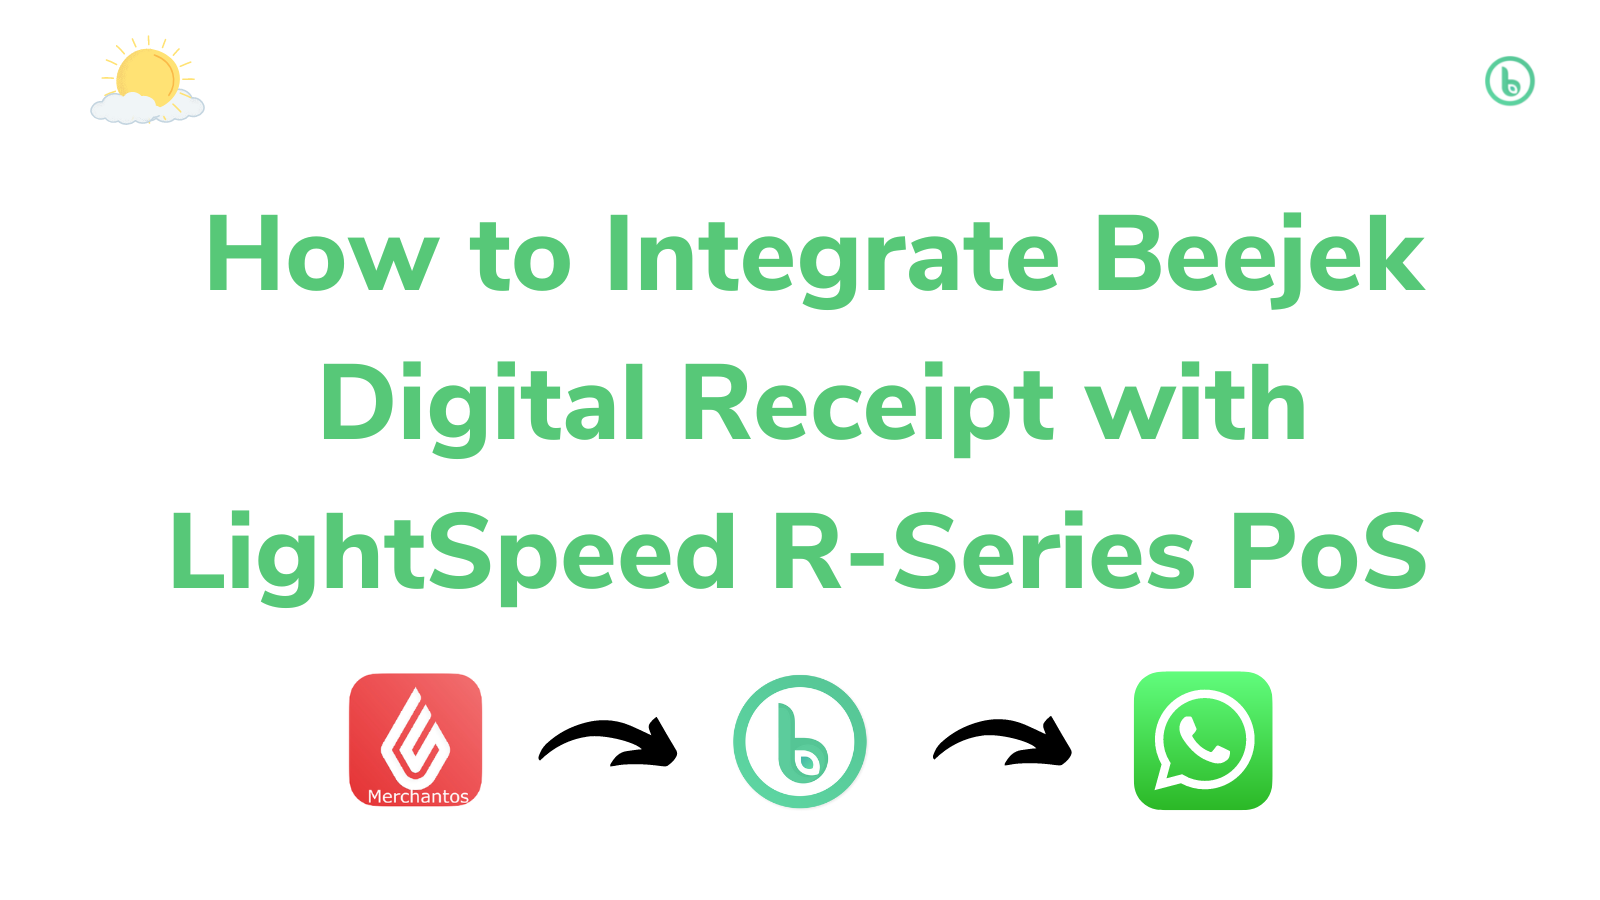 How to Integrate LightSpeed R-Series PoS with Beejek to Send WhatsApp Receipts 